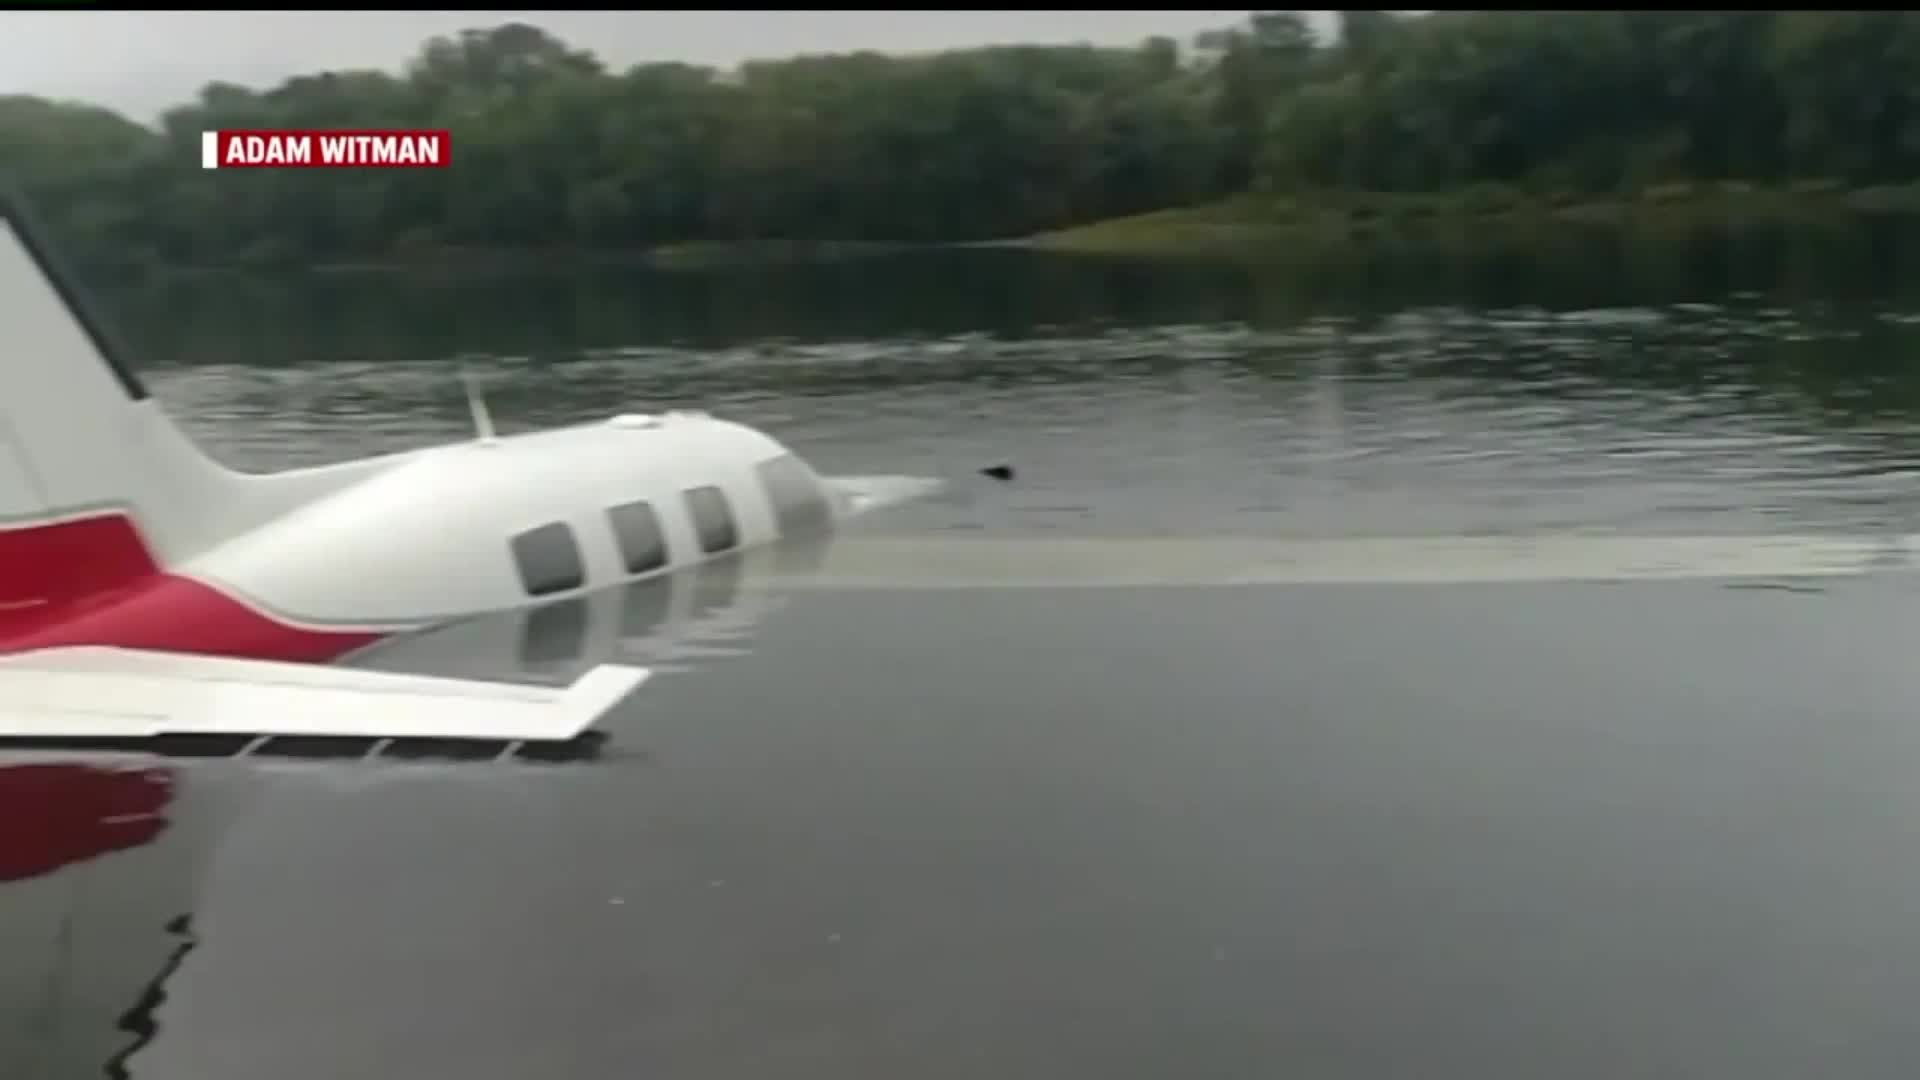 Plane that crash-landed into water remains in Susquehanna River